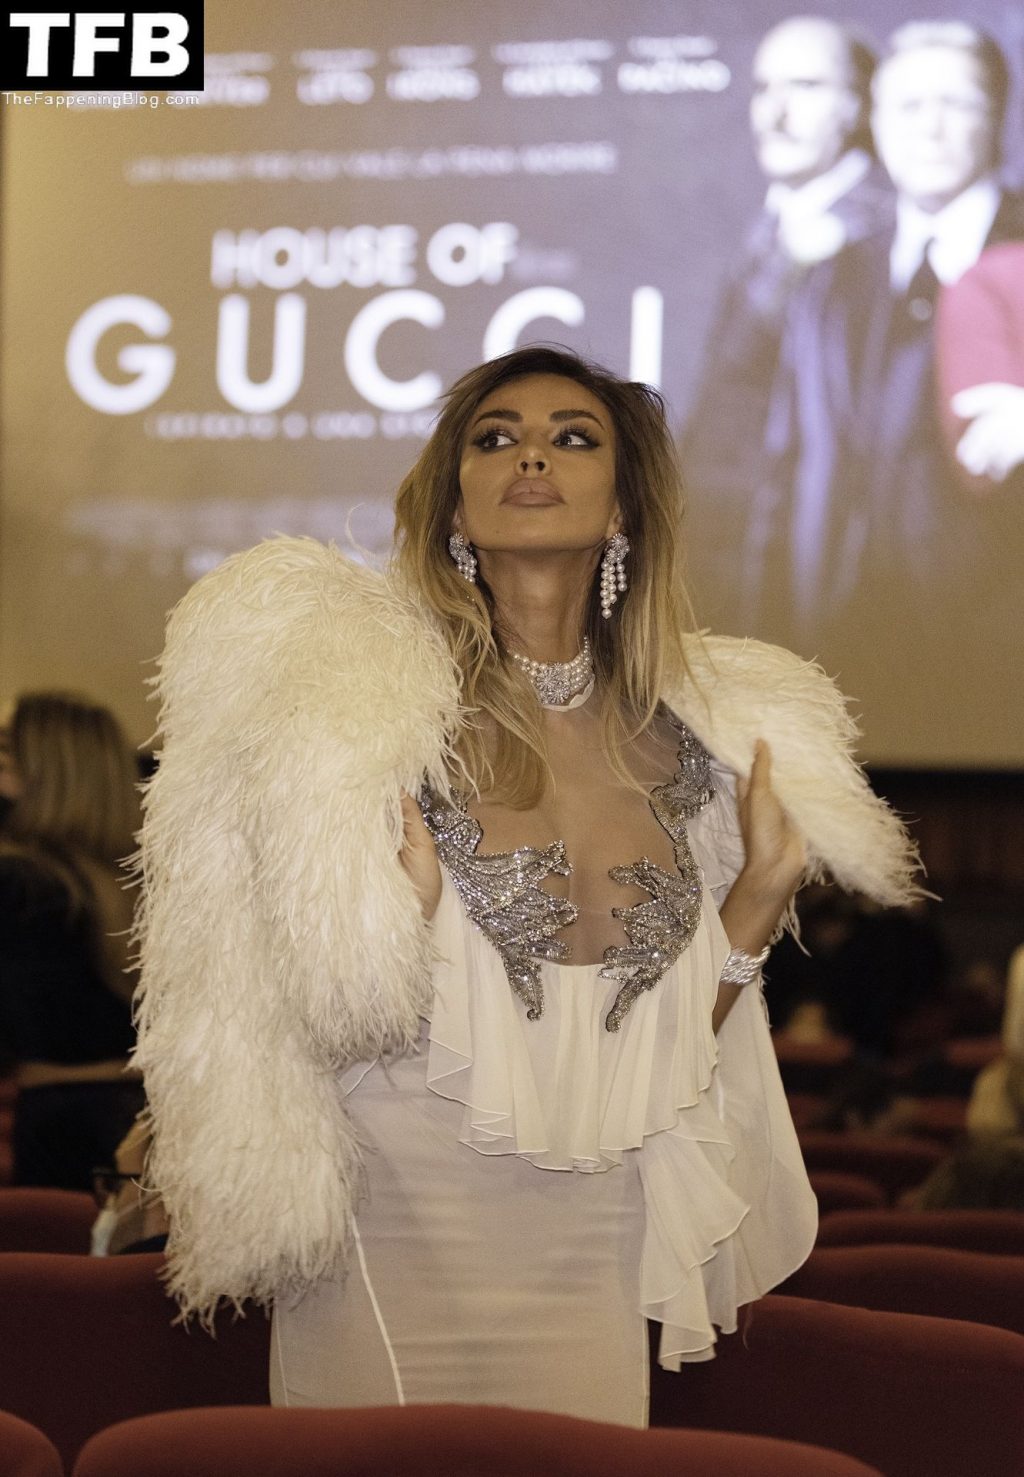 Madalina Ghenea Looks Stunning at the Premiere ‘House of Gucci’ (82 Photos)